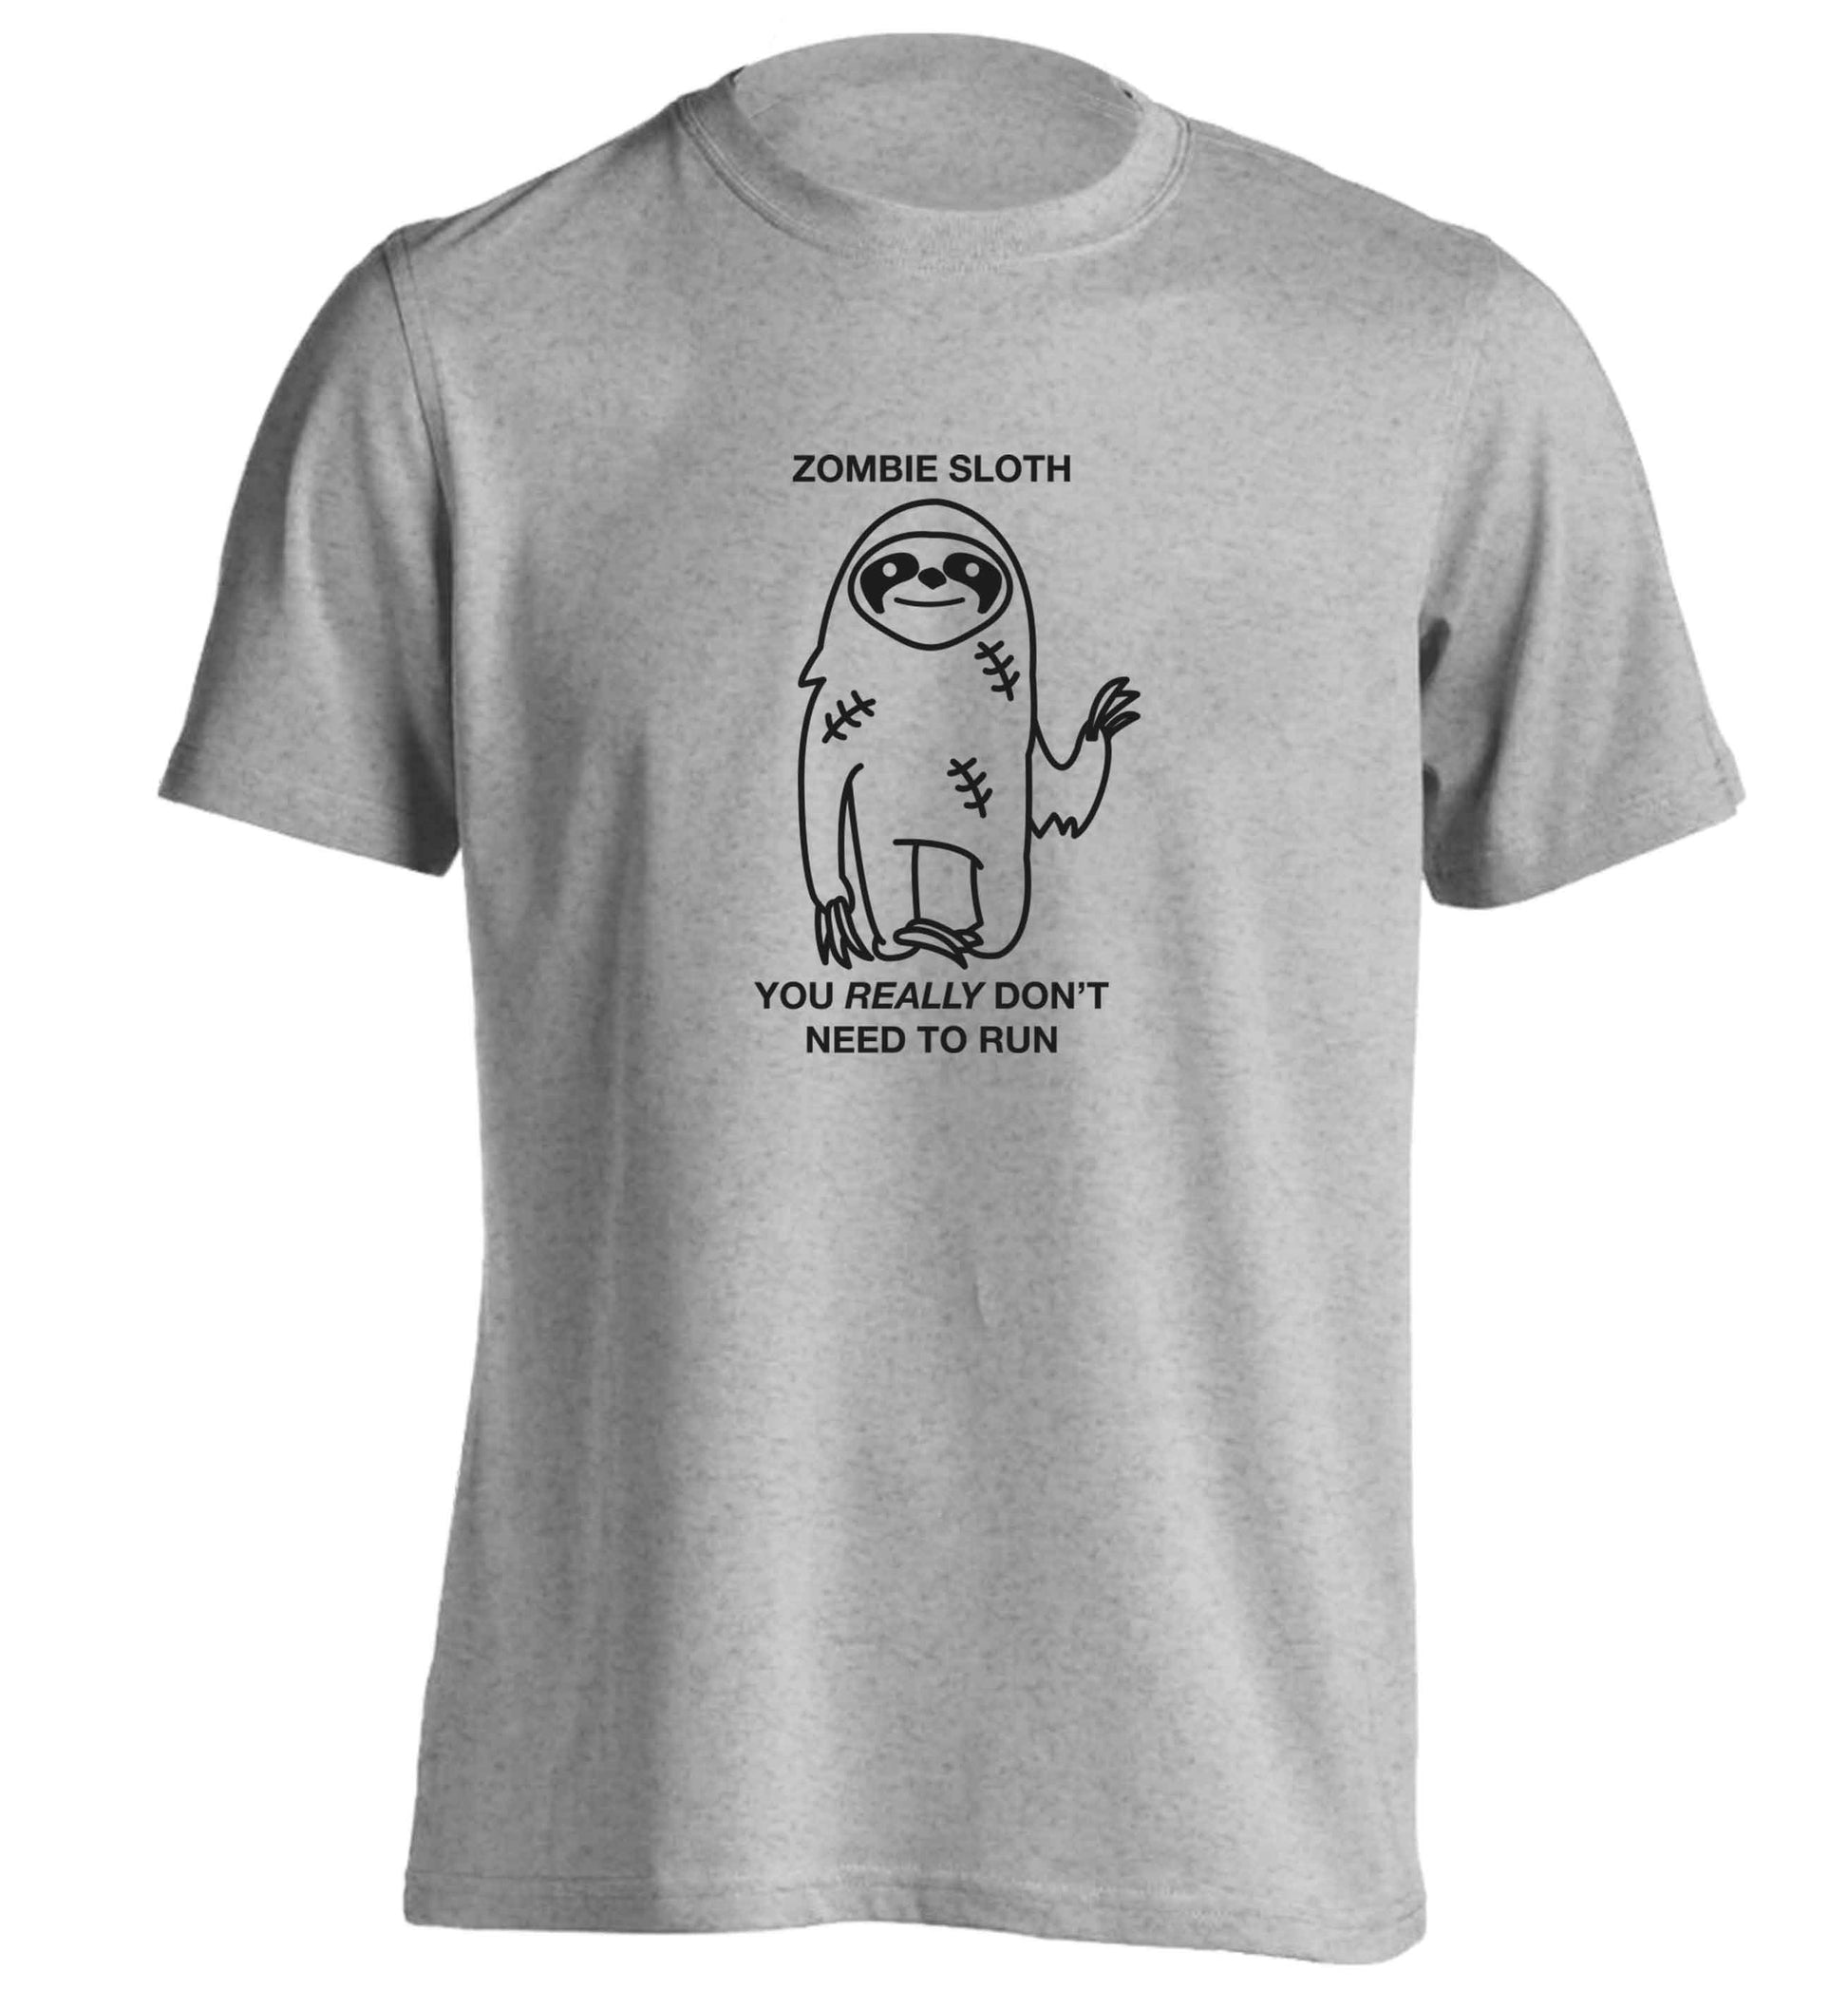 Zombie sloth you really don't need to run adults unisex grey Tshirt 2XL